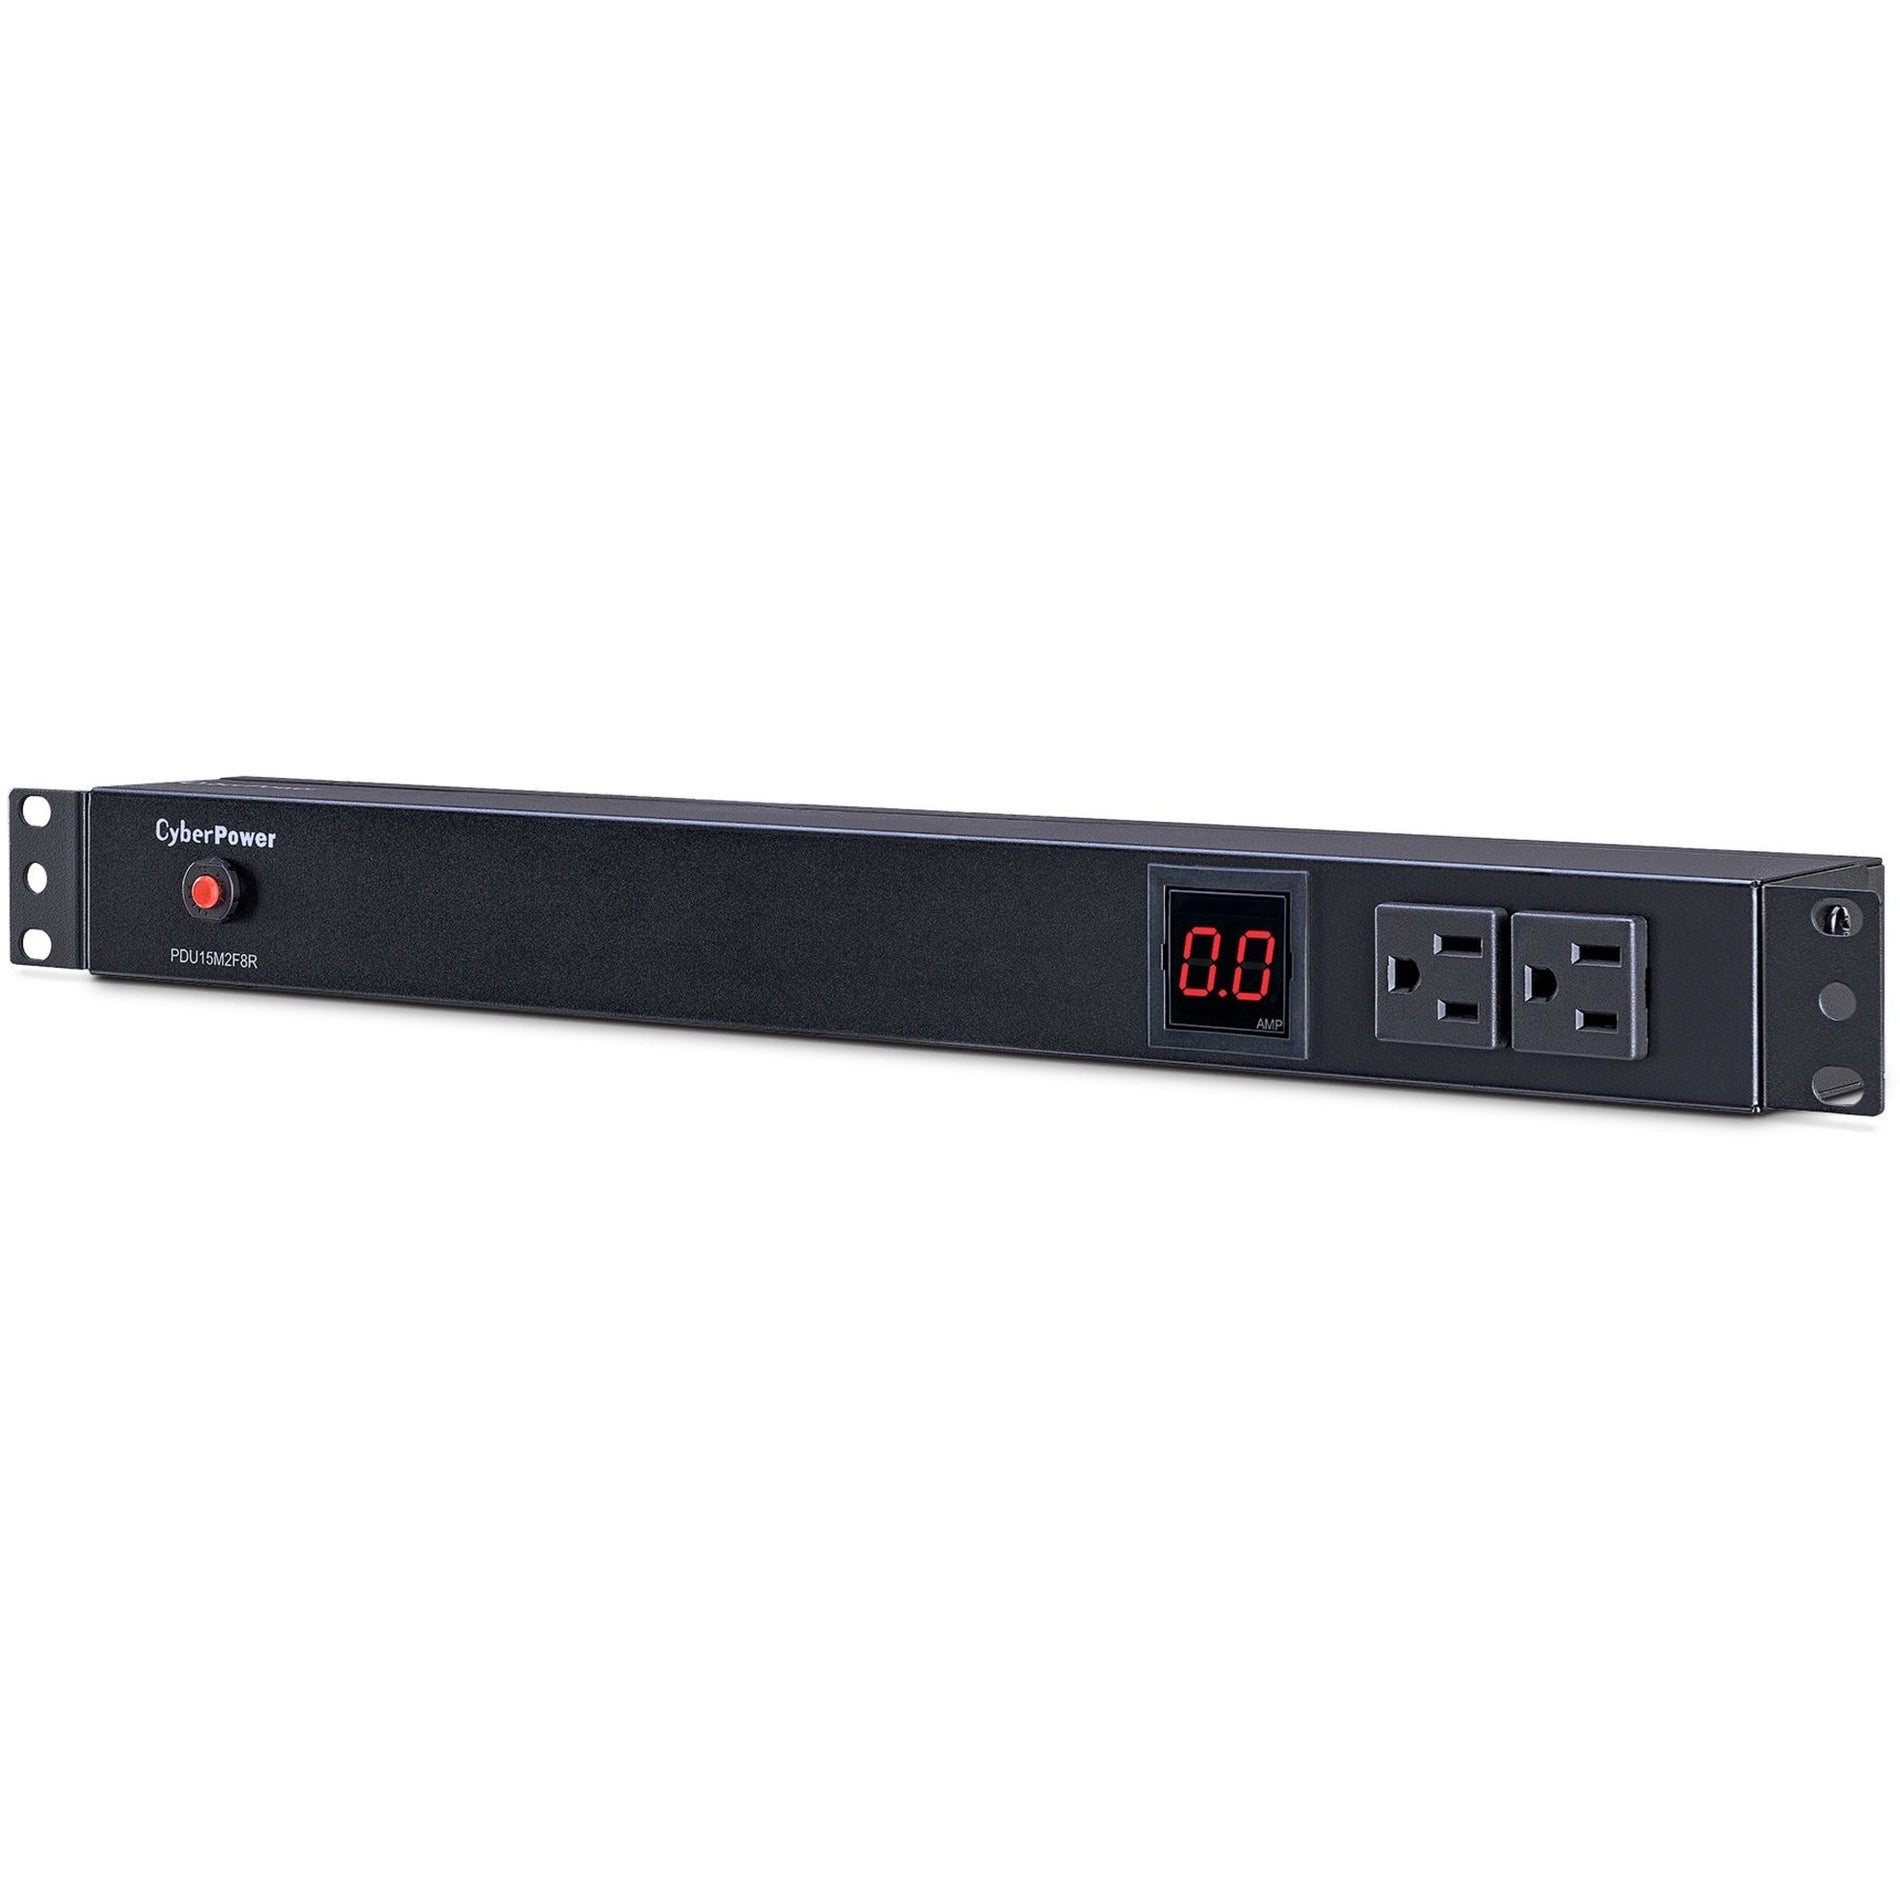 CyberPower PDU15M2F8R Metered PDU, 10-Outlets, Single Phase 15A, 100-125V AC